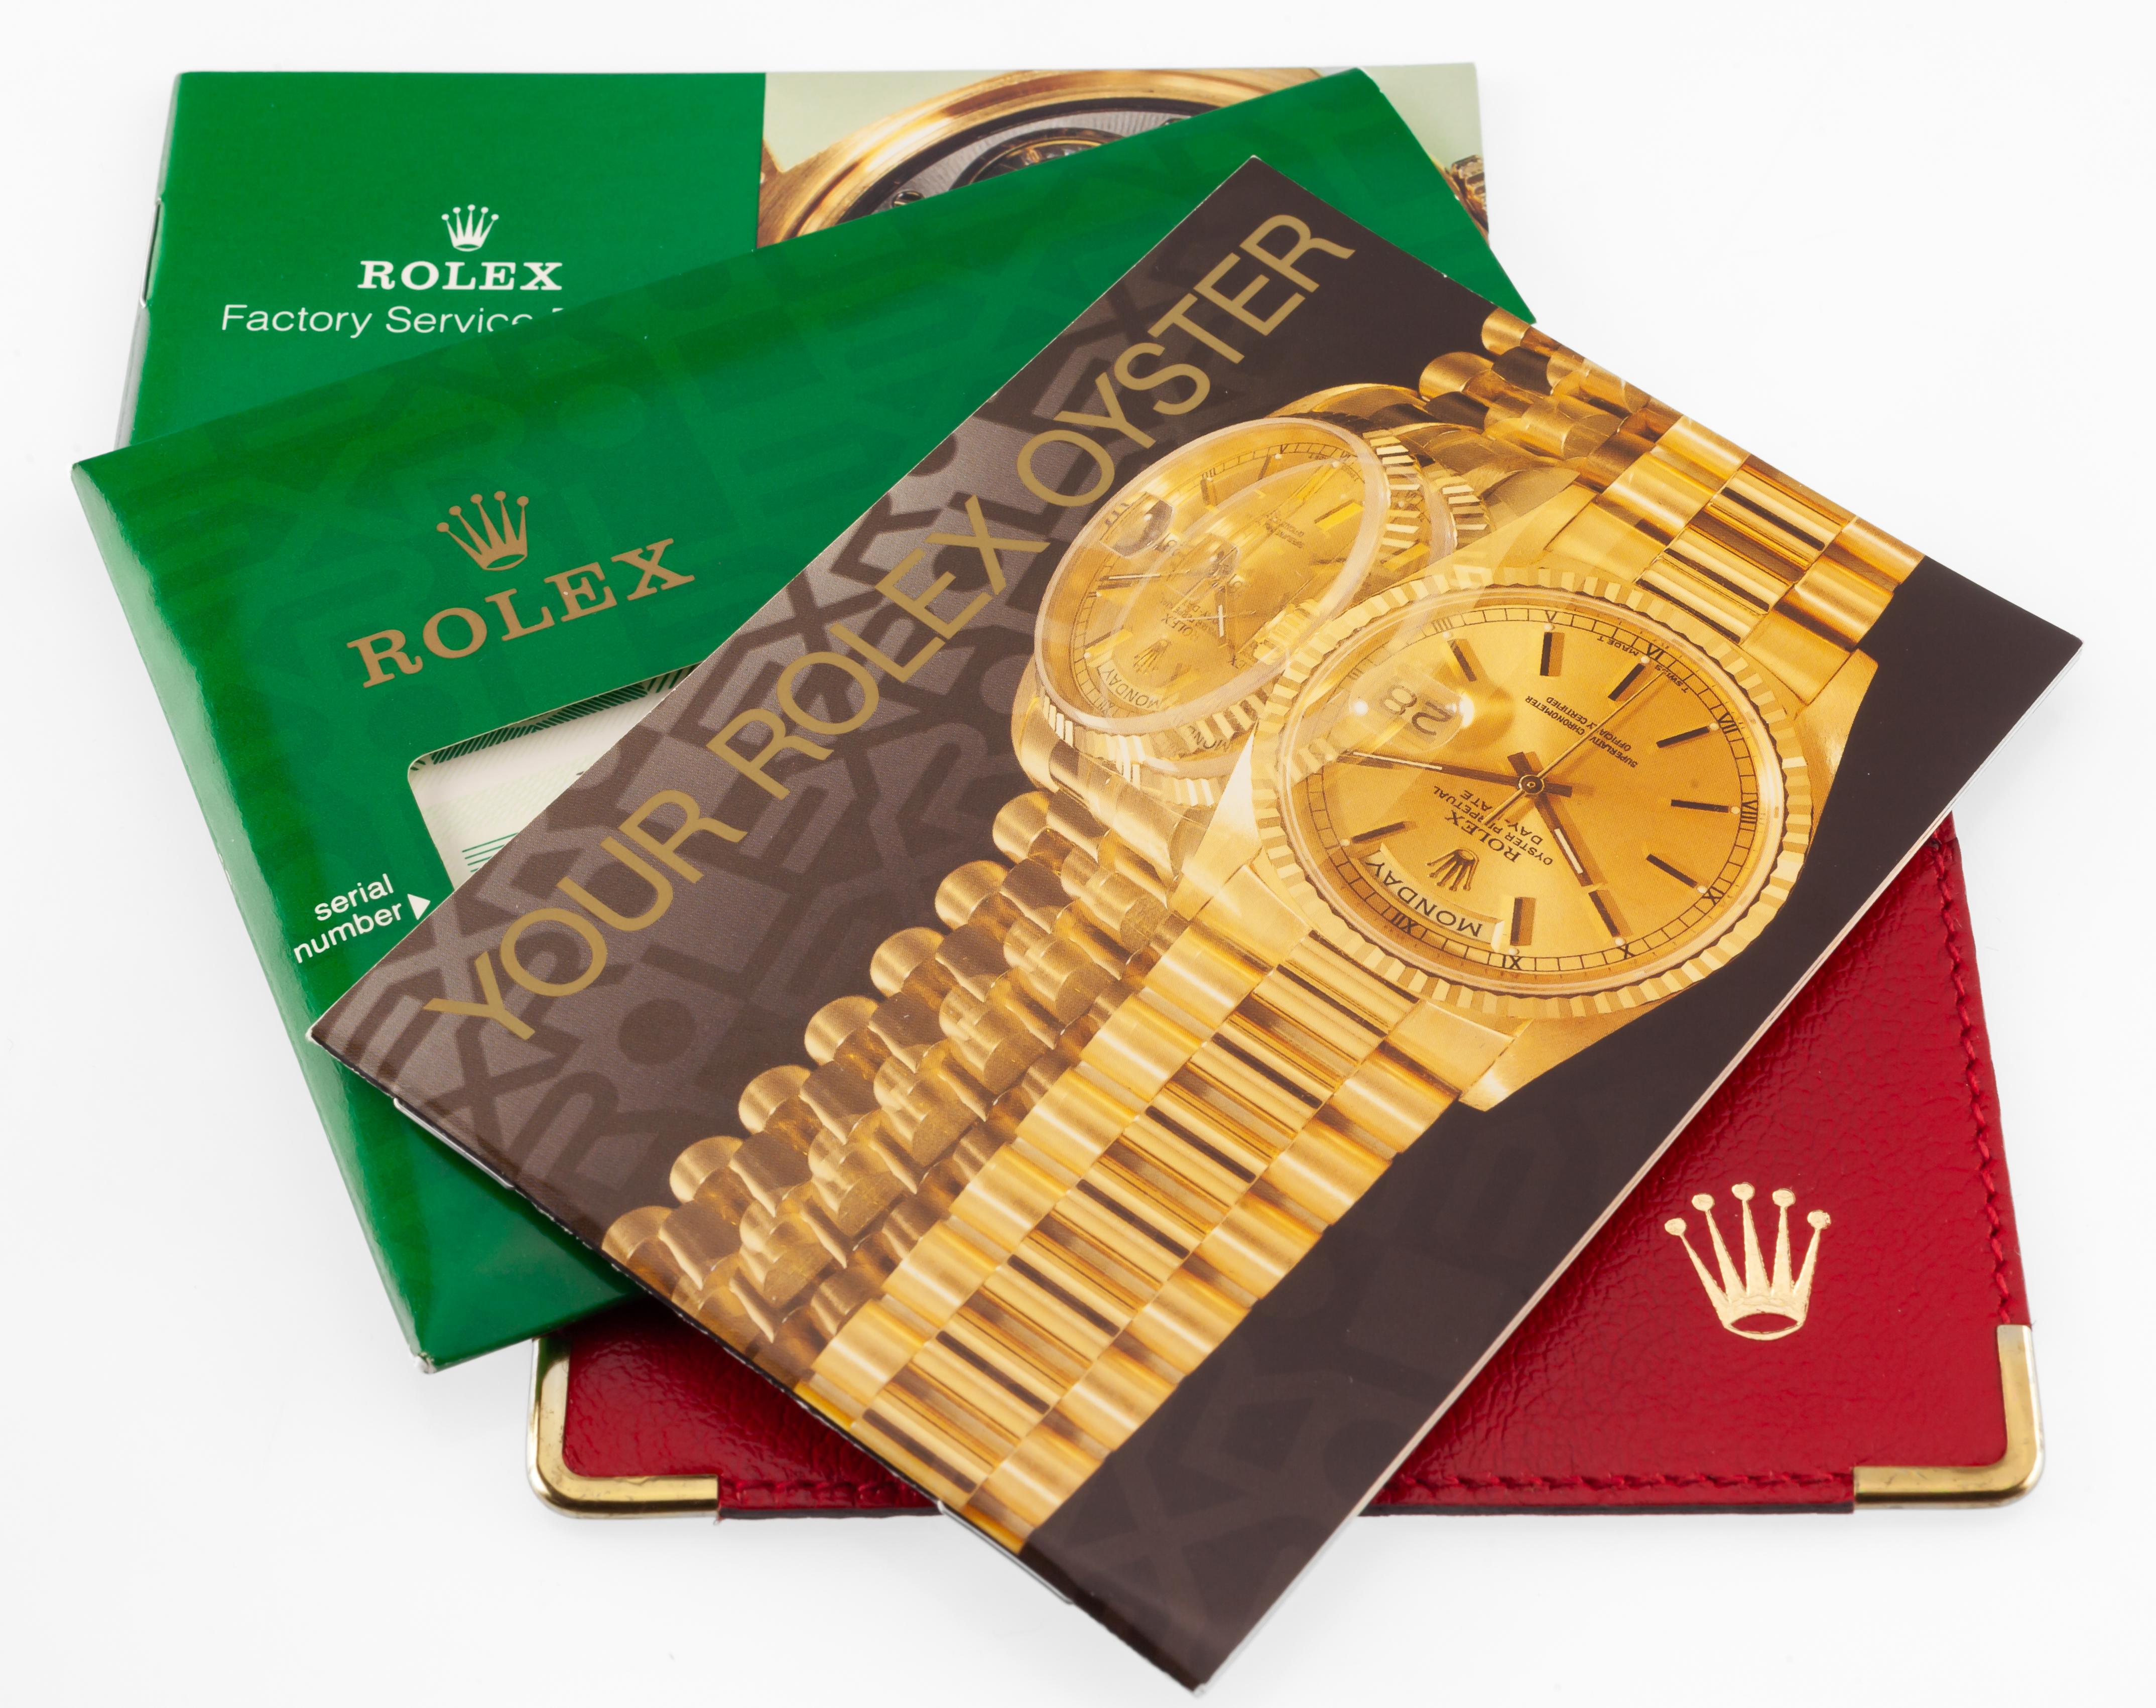 Rolex Women's 18k Yellow Gold President OPDJ 69178 w/ Box and Papers For Sale 2